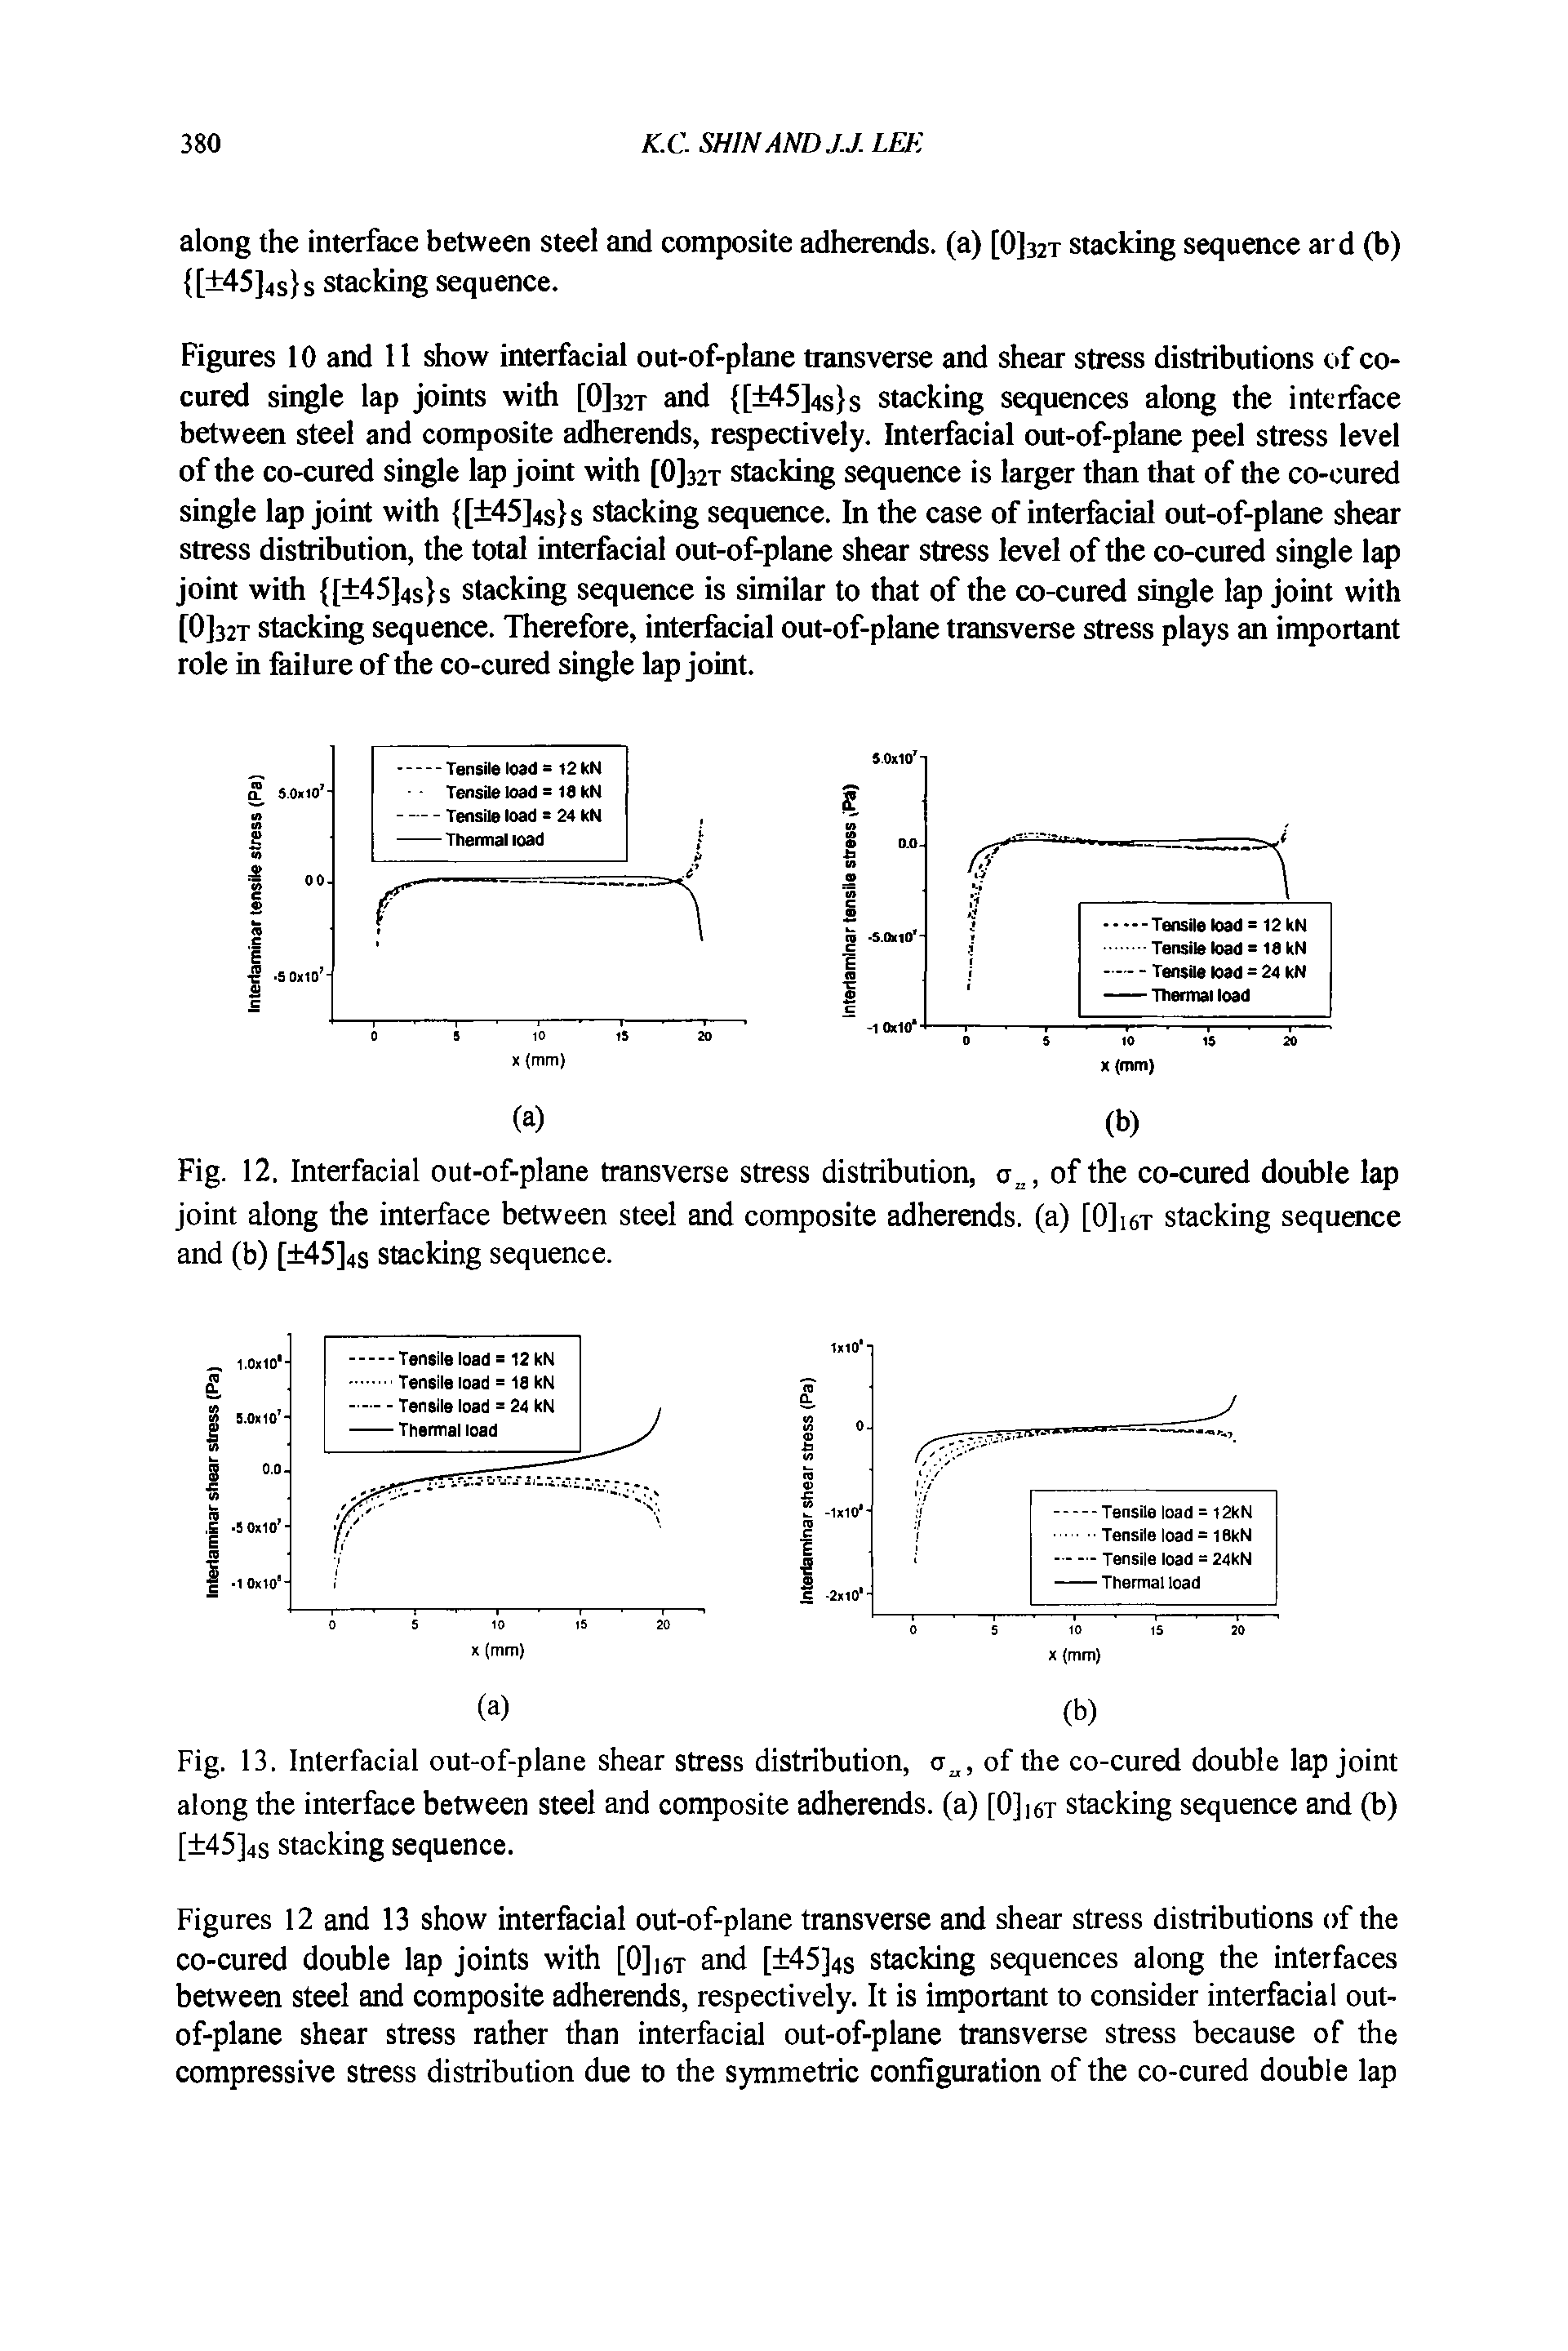 Figures 12 and 13 show interfacial out-of-plane transverse and shear stress distributions of the co-cured double lap joints with [0]i6t and [ 45]4s stacking sequences along the interfaces between steel and composite adherends, respectively. It is important to consider interfacial out-of-plane shear stress rather than interfacial out-of-plane transverse stress because of the compressive stress distribution due to the symmetric configuration of the co-cured double lap...